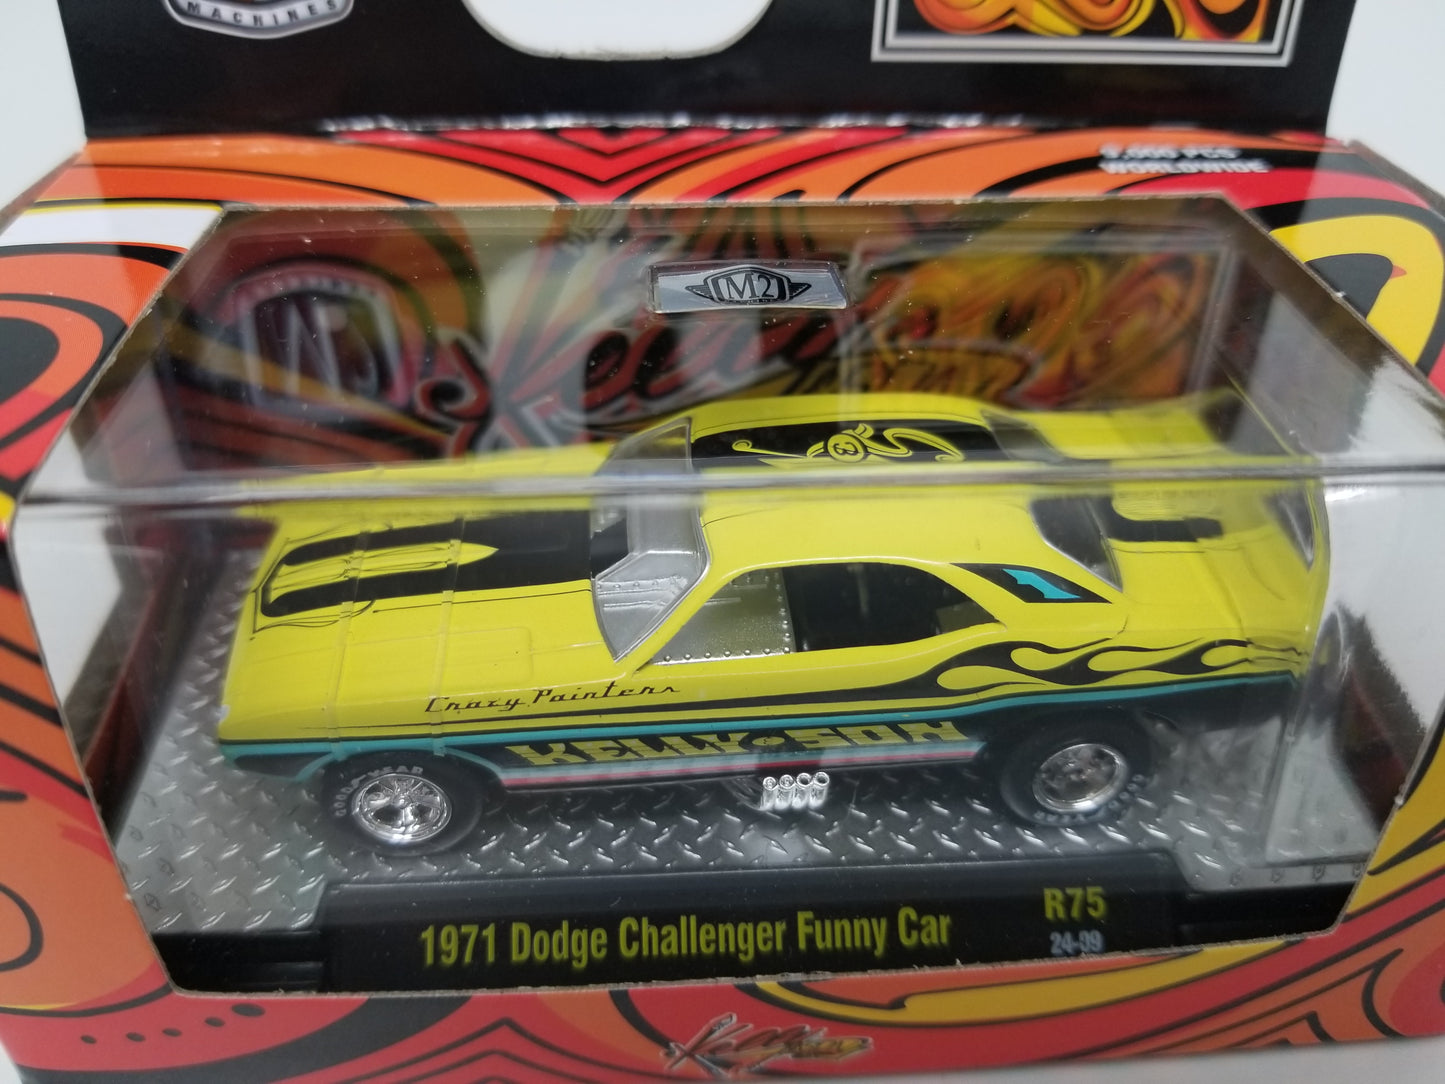 M2 1971 Dodge Challenger Funny Car - Kelly and Sons